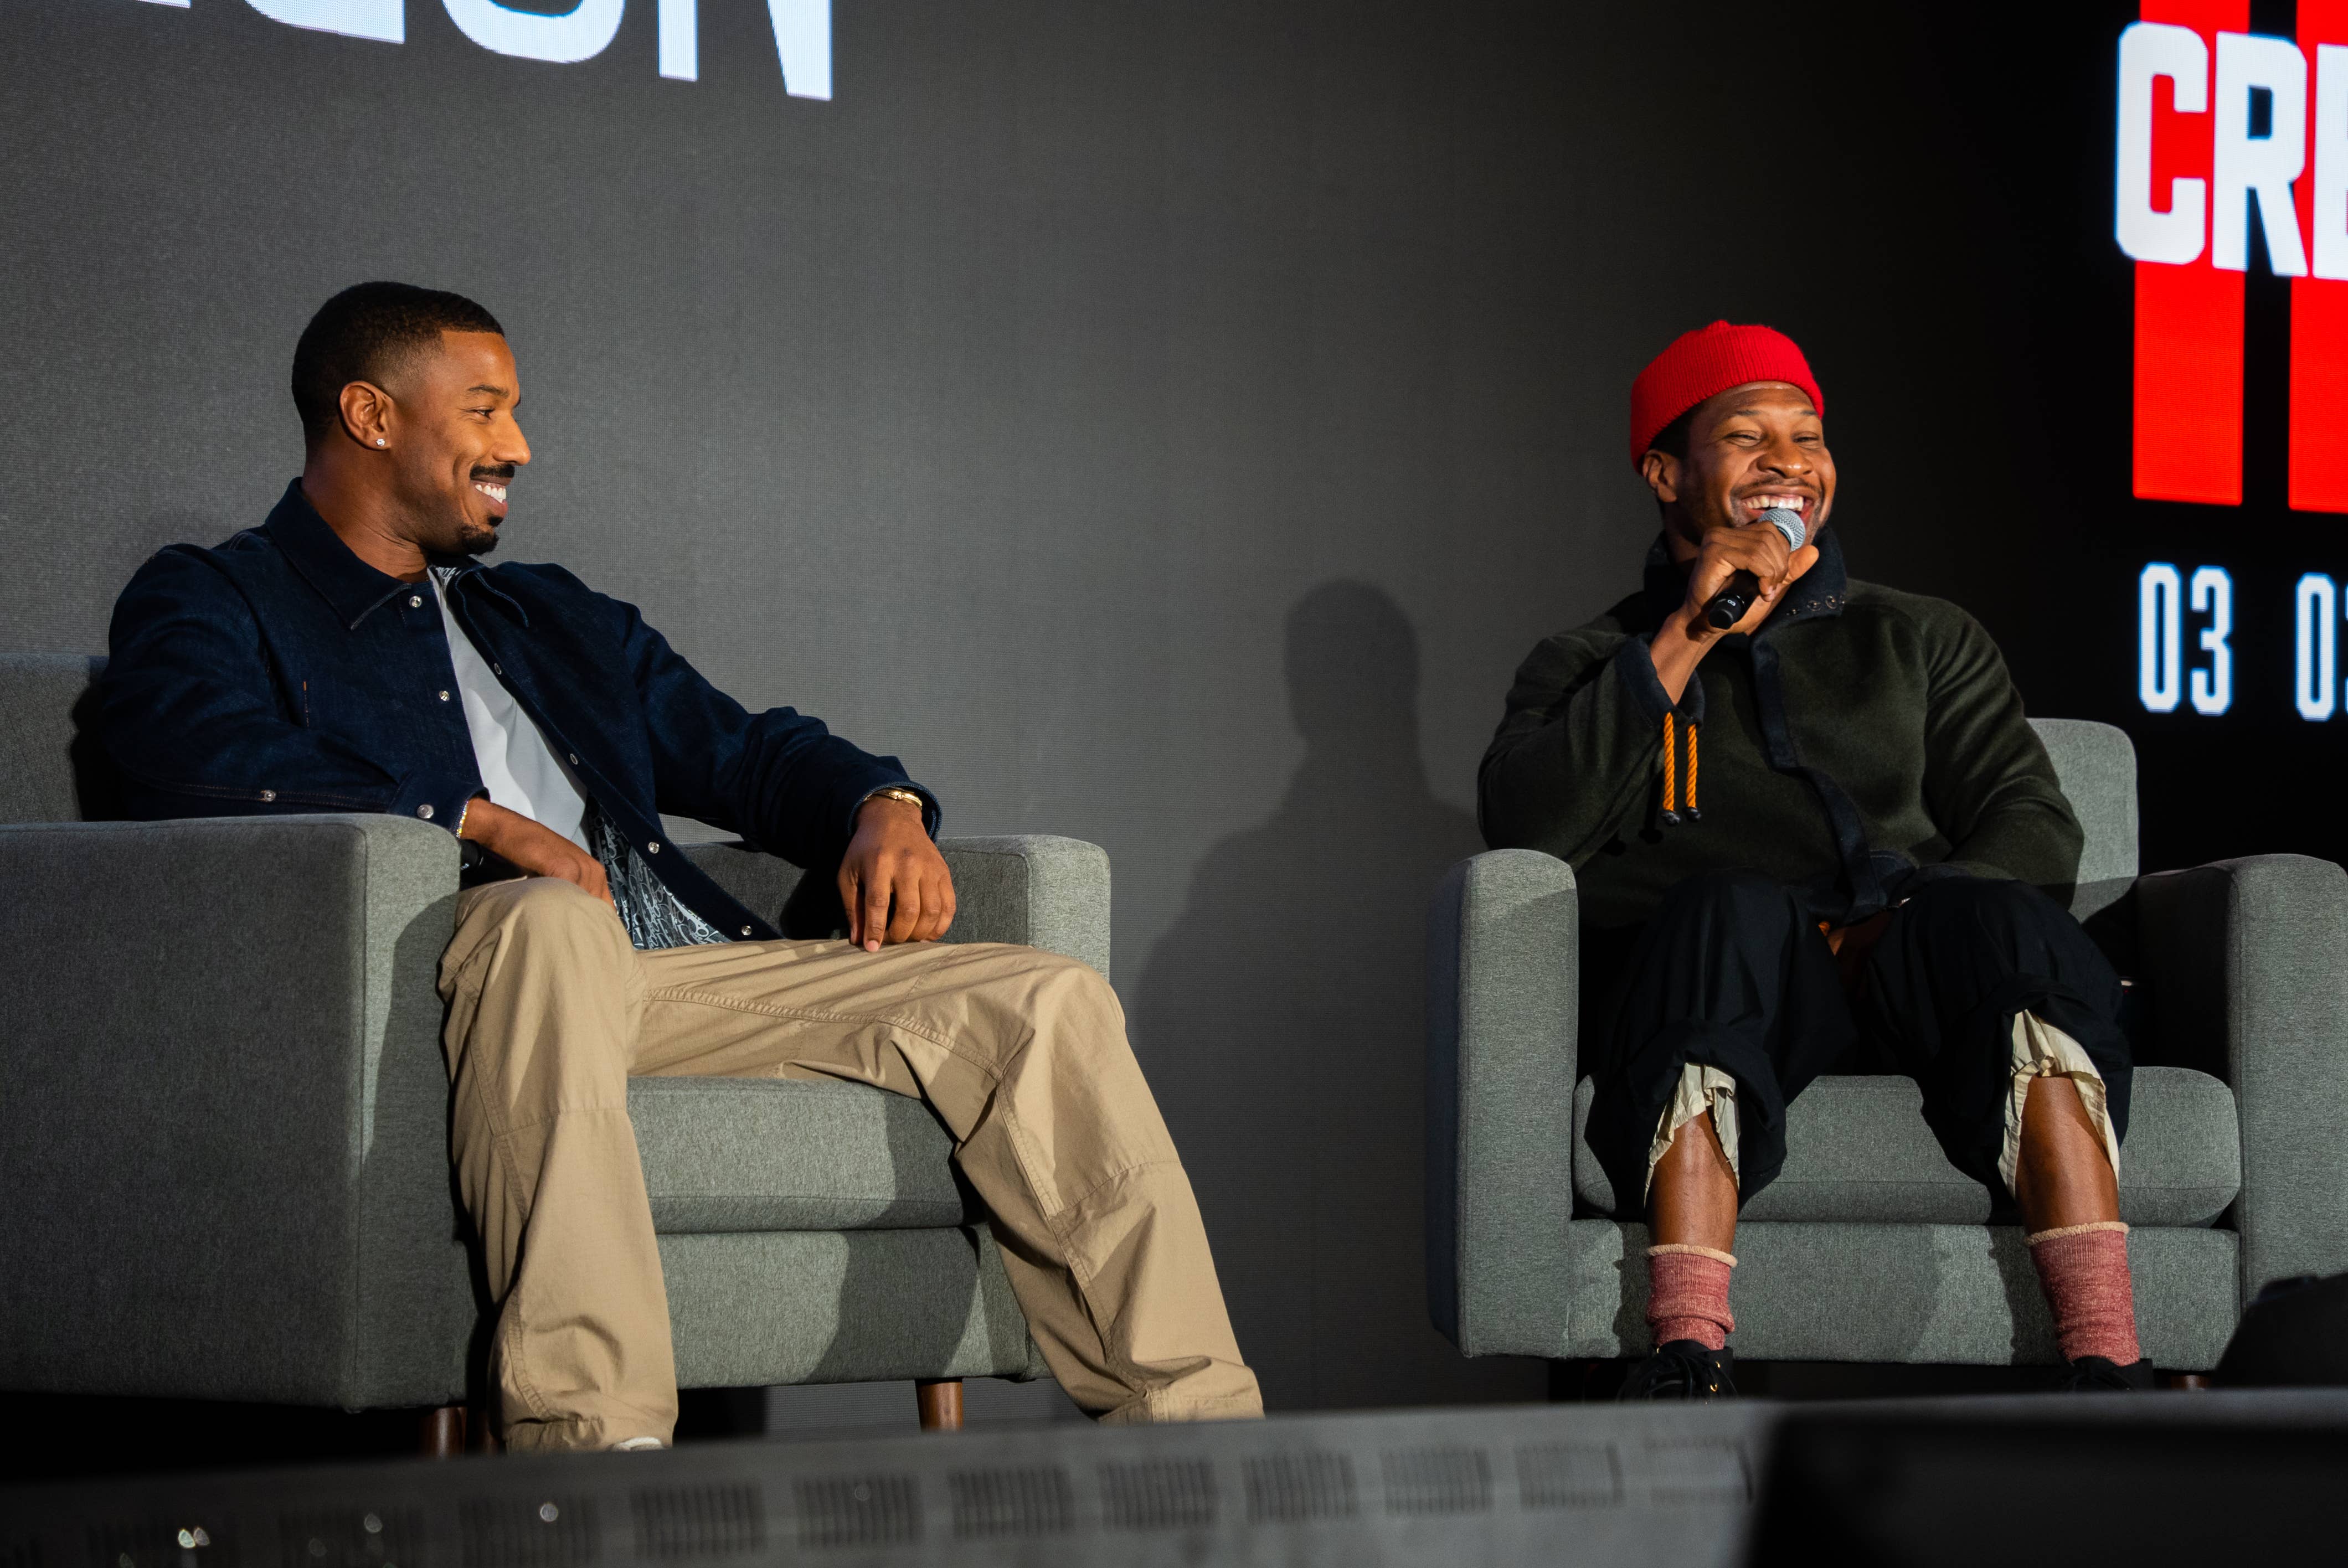 Creed 3': Michael B. Jordan on Why Training Montage Was Such a